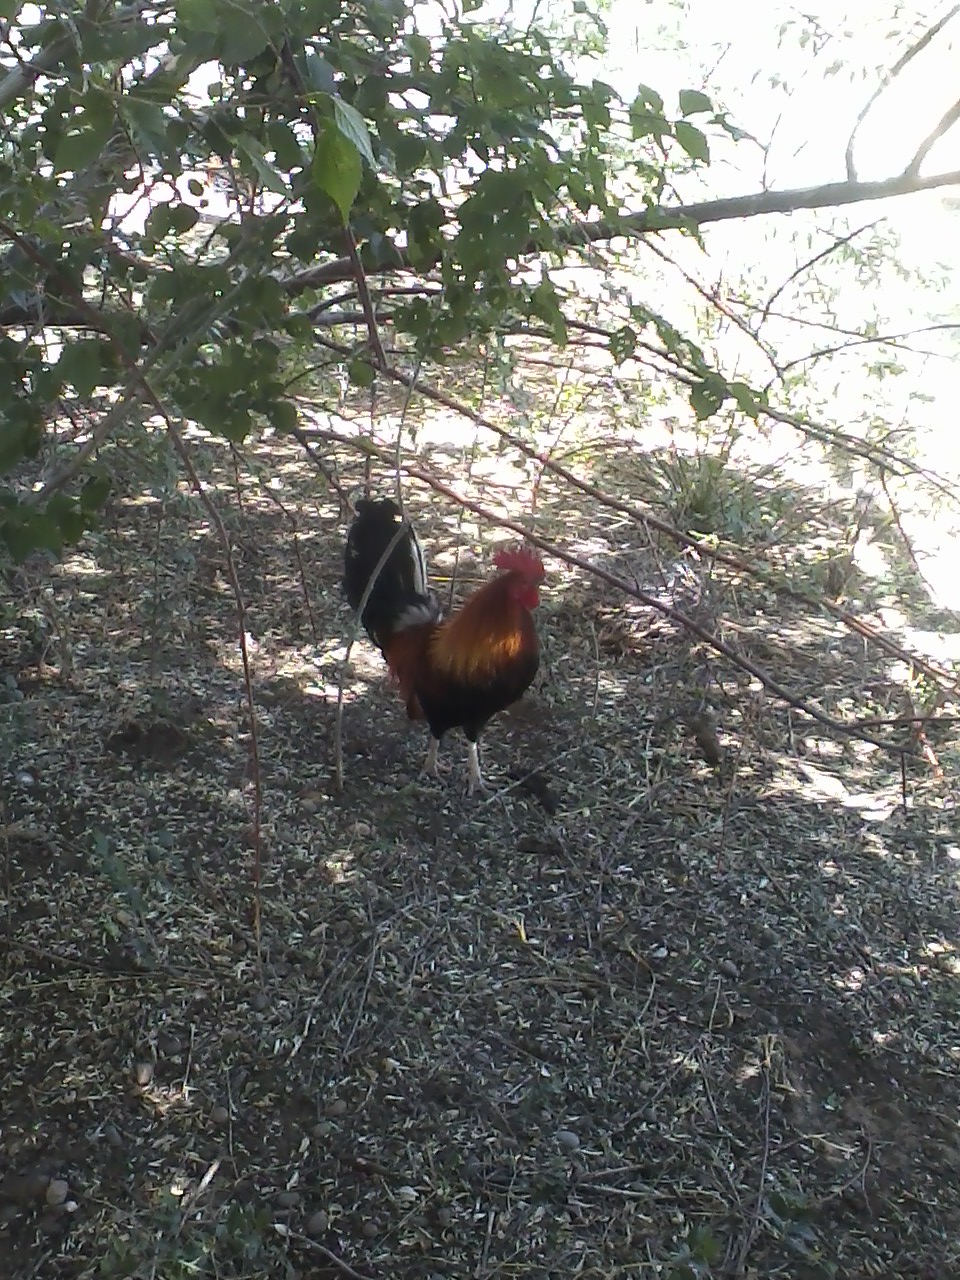 Randall. 1 year old American Game Bantam rooster